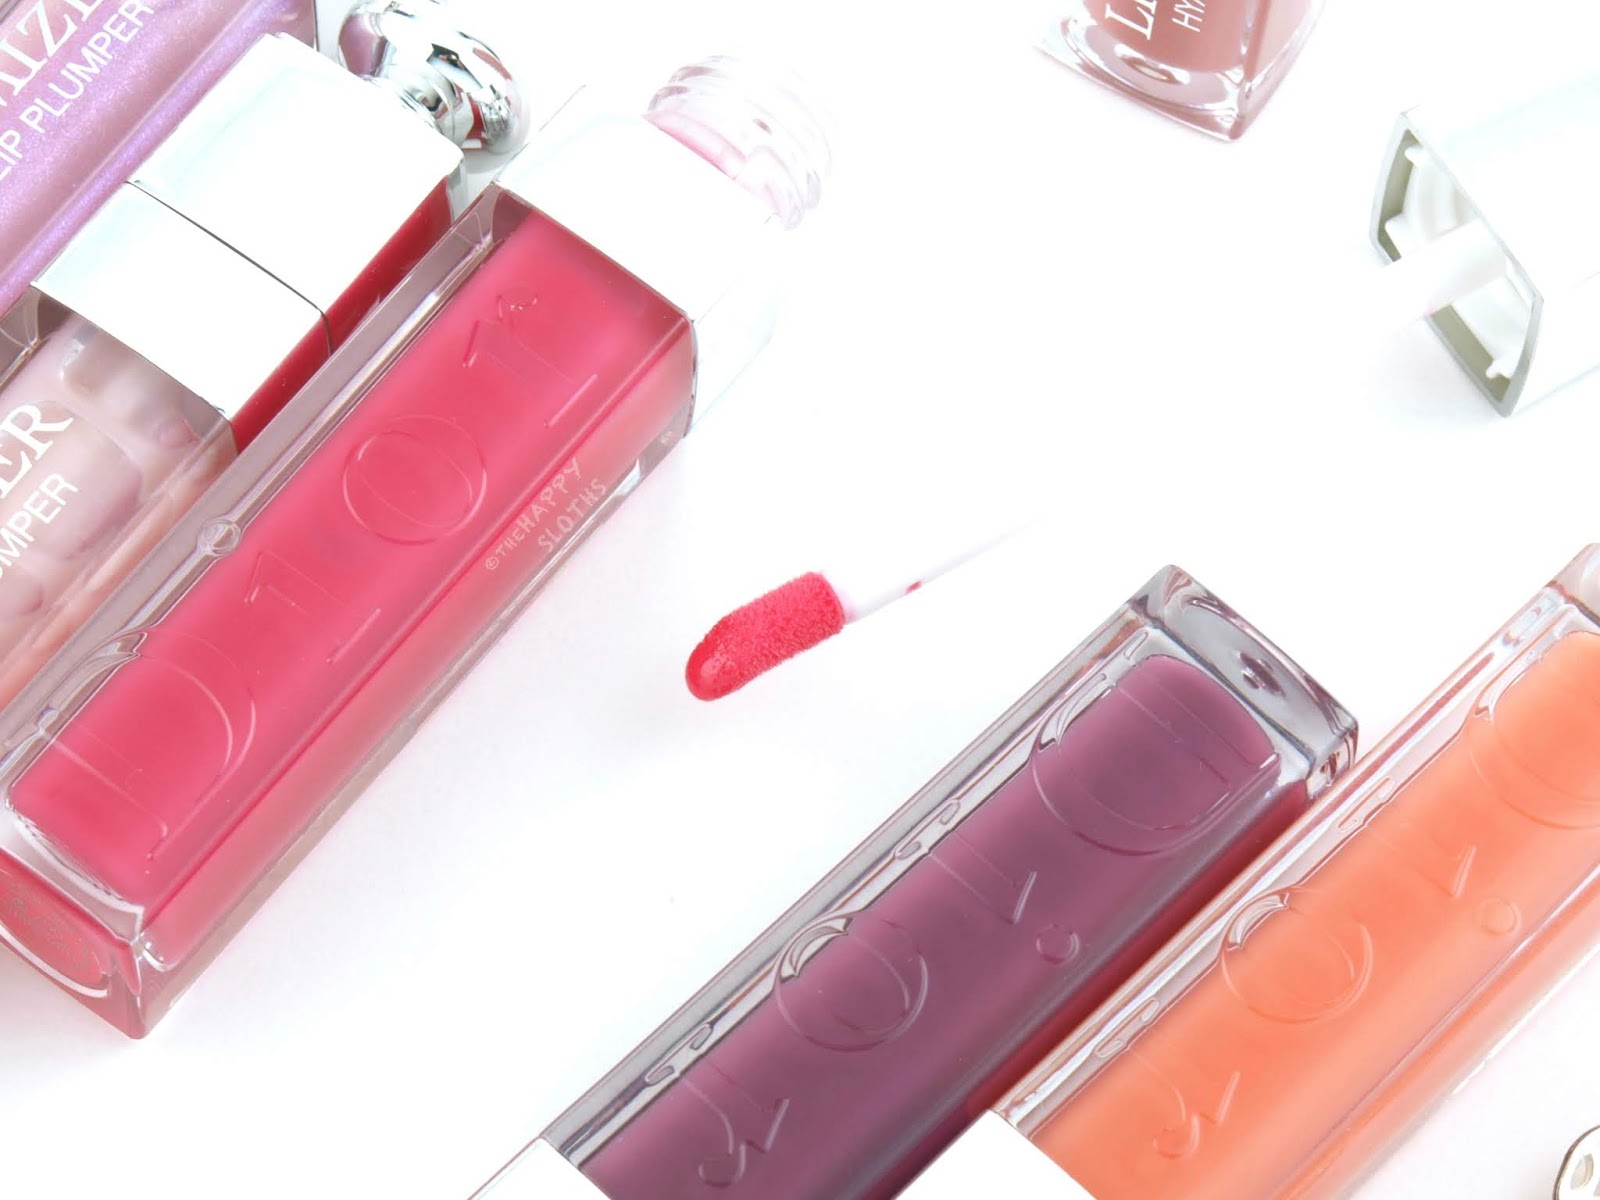 Dior | *NEW SHADES* Lip Maximizer Hyaluronic Lip Plumper: Review and Swatches